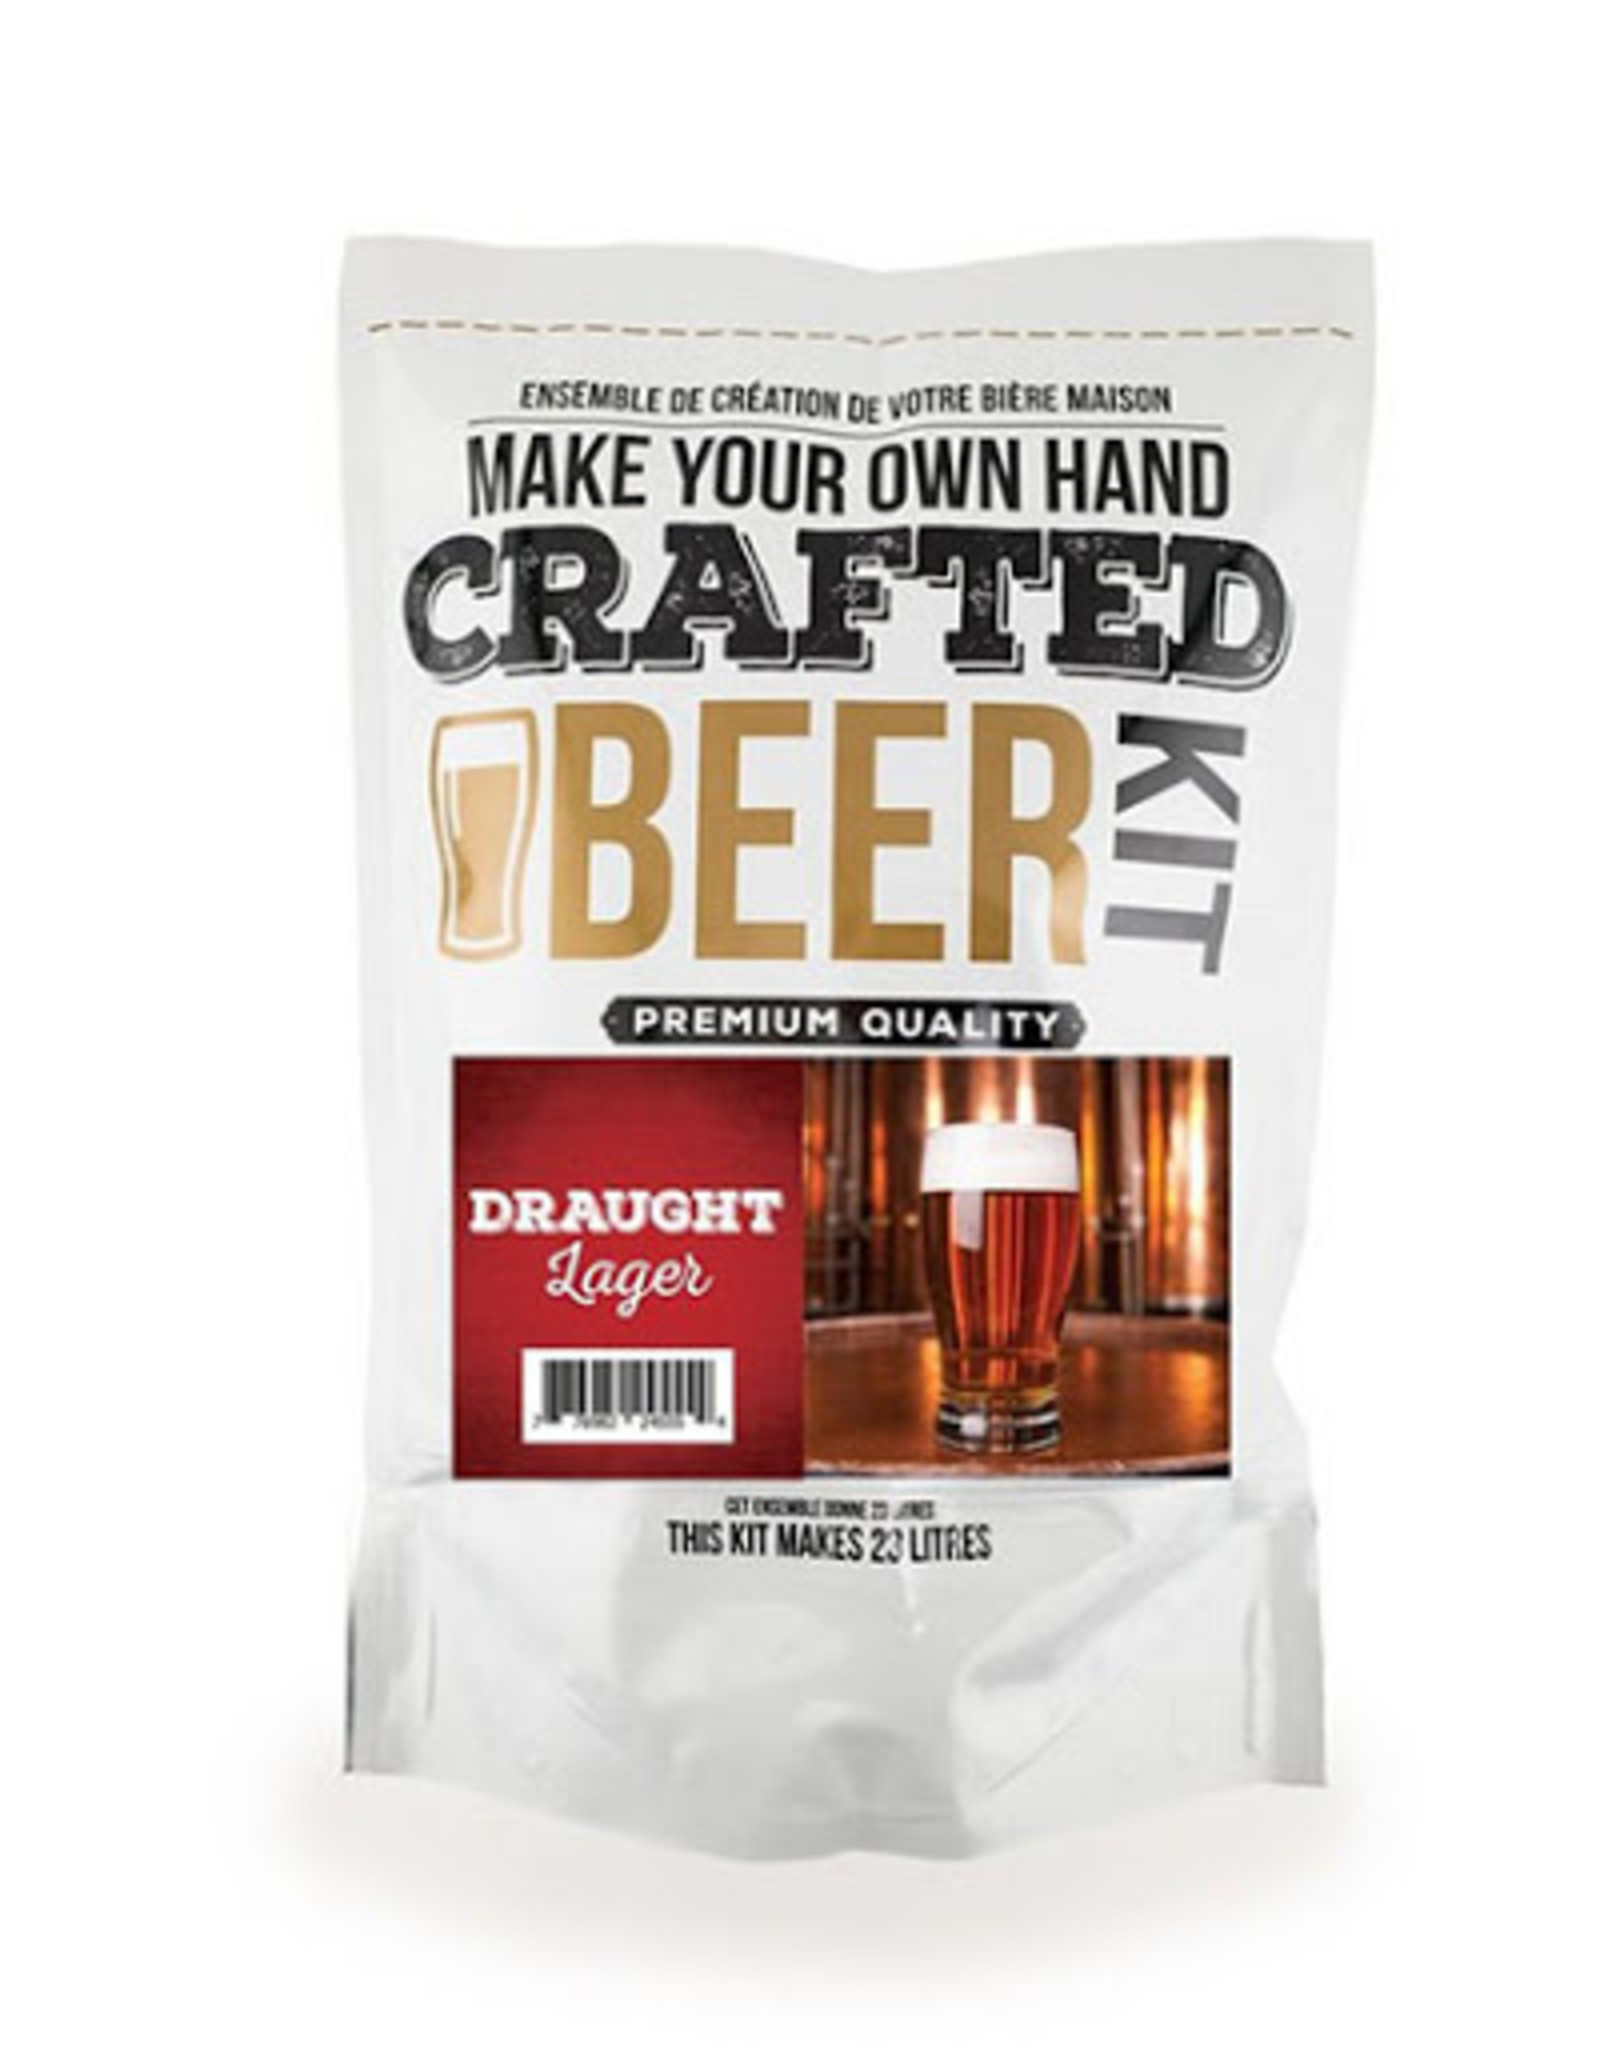 Crafted beer kit - Draught lager